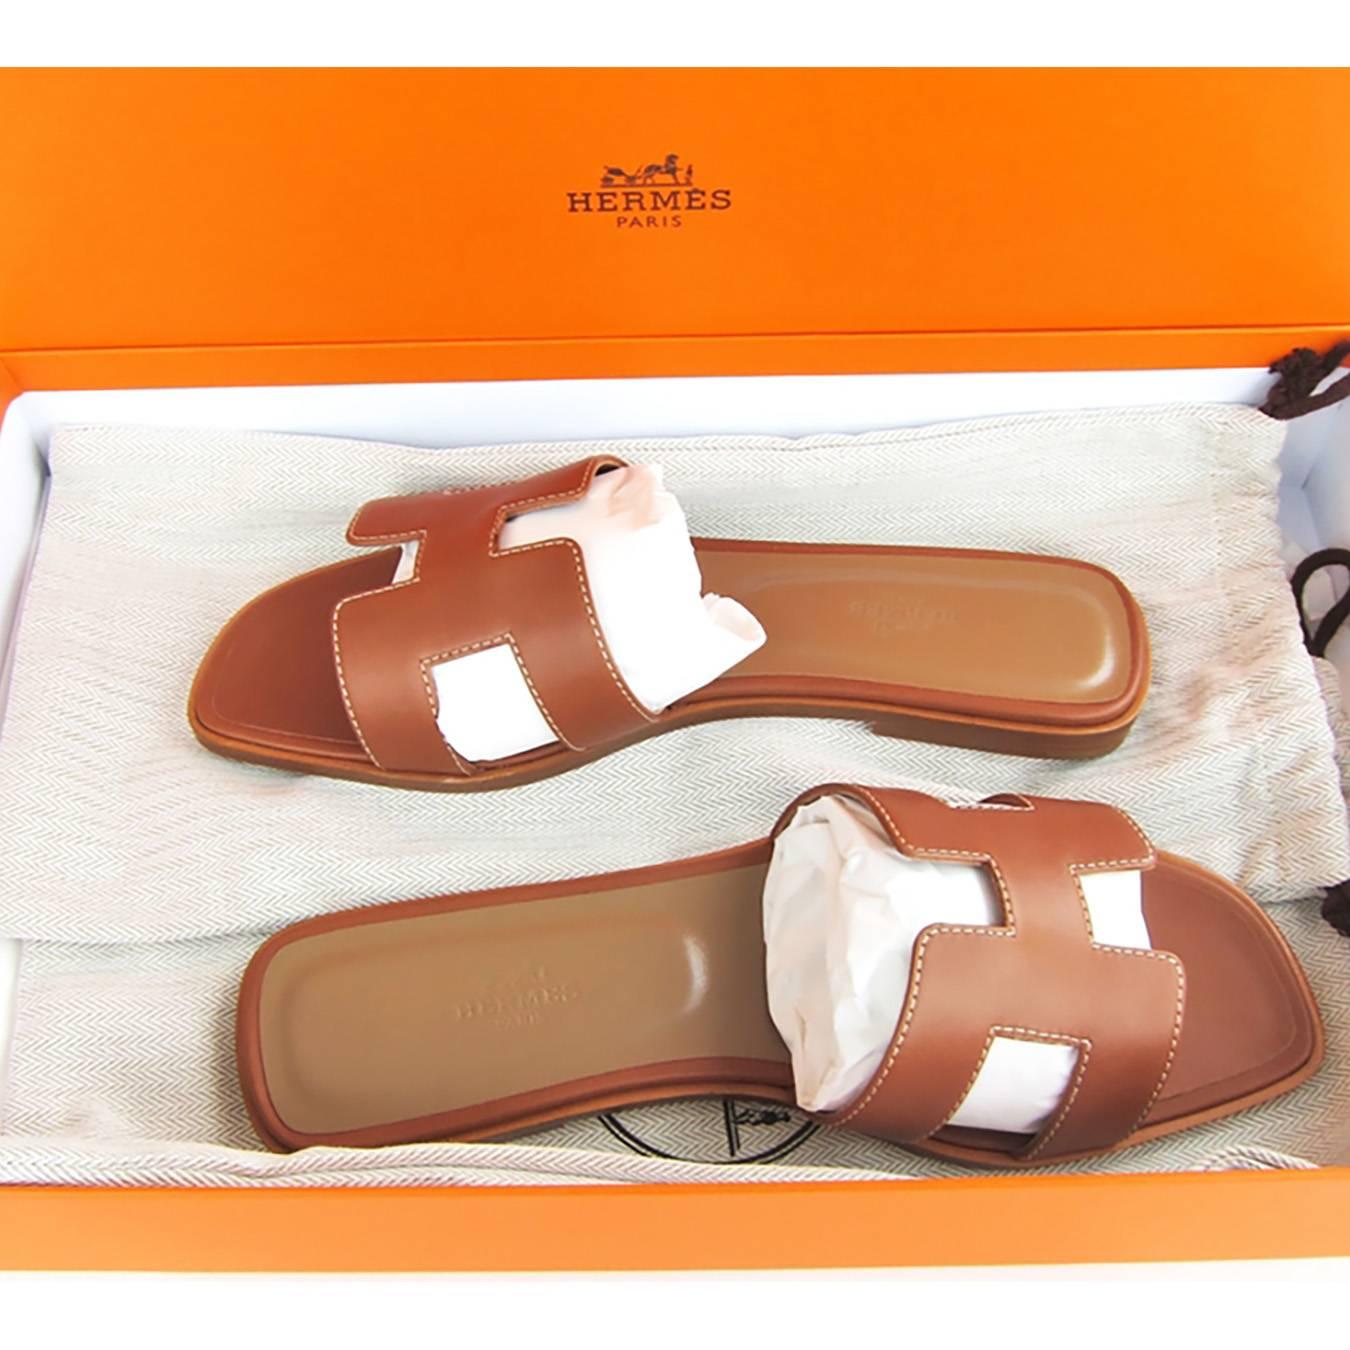 Hermes Gold Oran Box Leather Sandals Shoes Size 40 or 3.9 Iconic 1